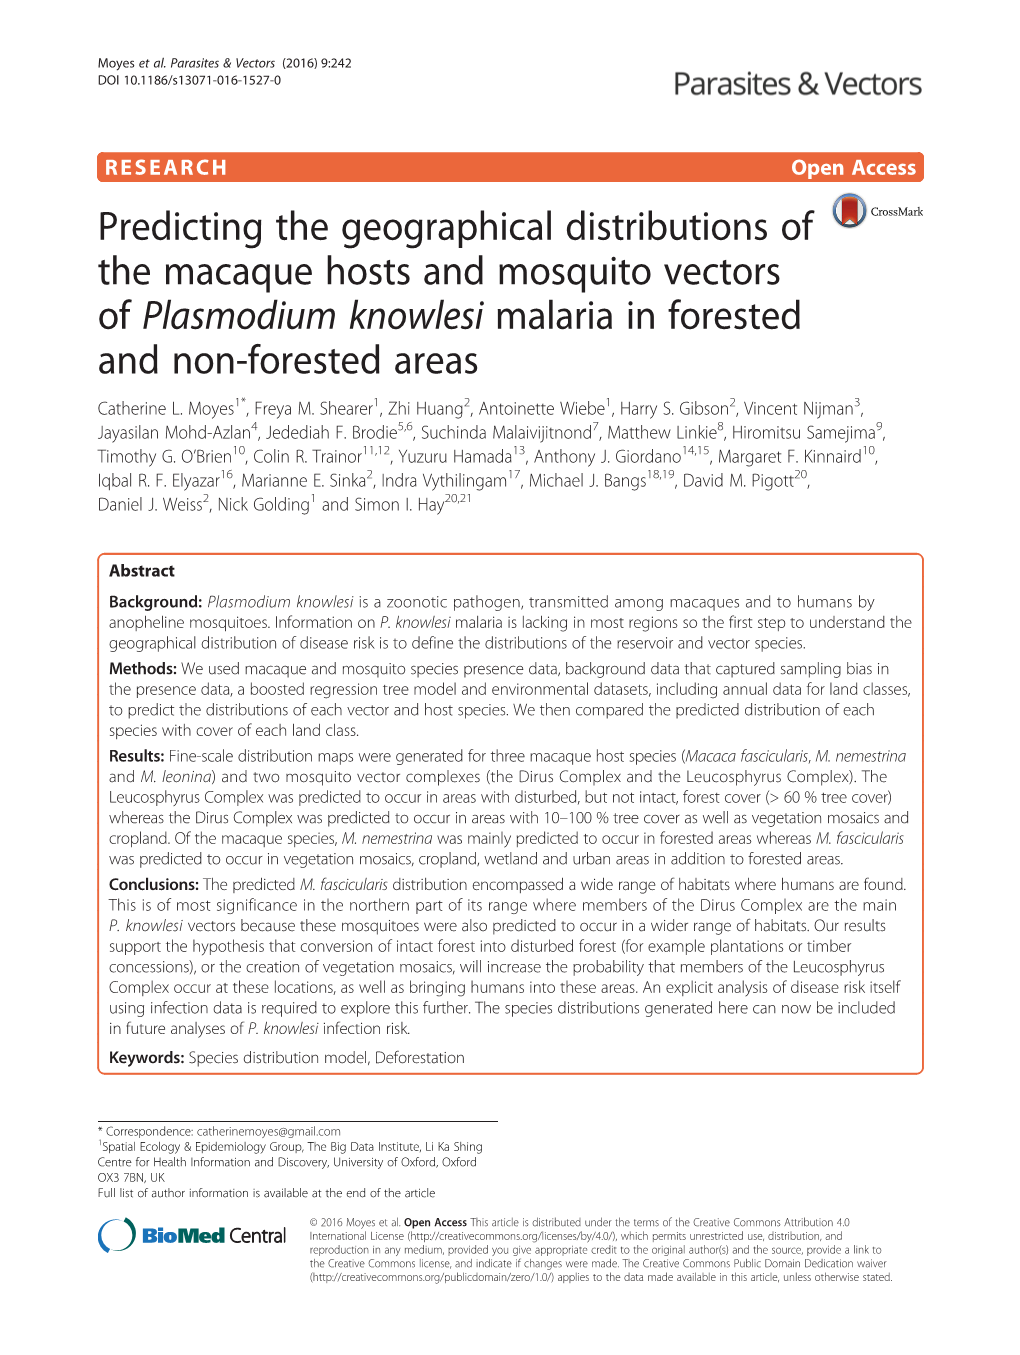 Predicting the Geographical Distributions of the Macaque Hosts and Mosquito Vectors of Plasmodium Knowlesi Malaria in Forested and Non-Forested Areas Catherine L